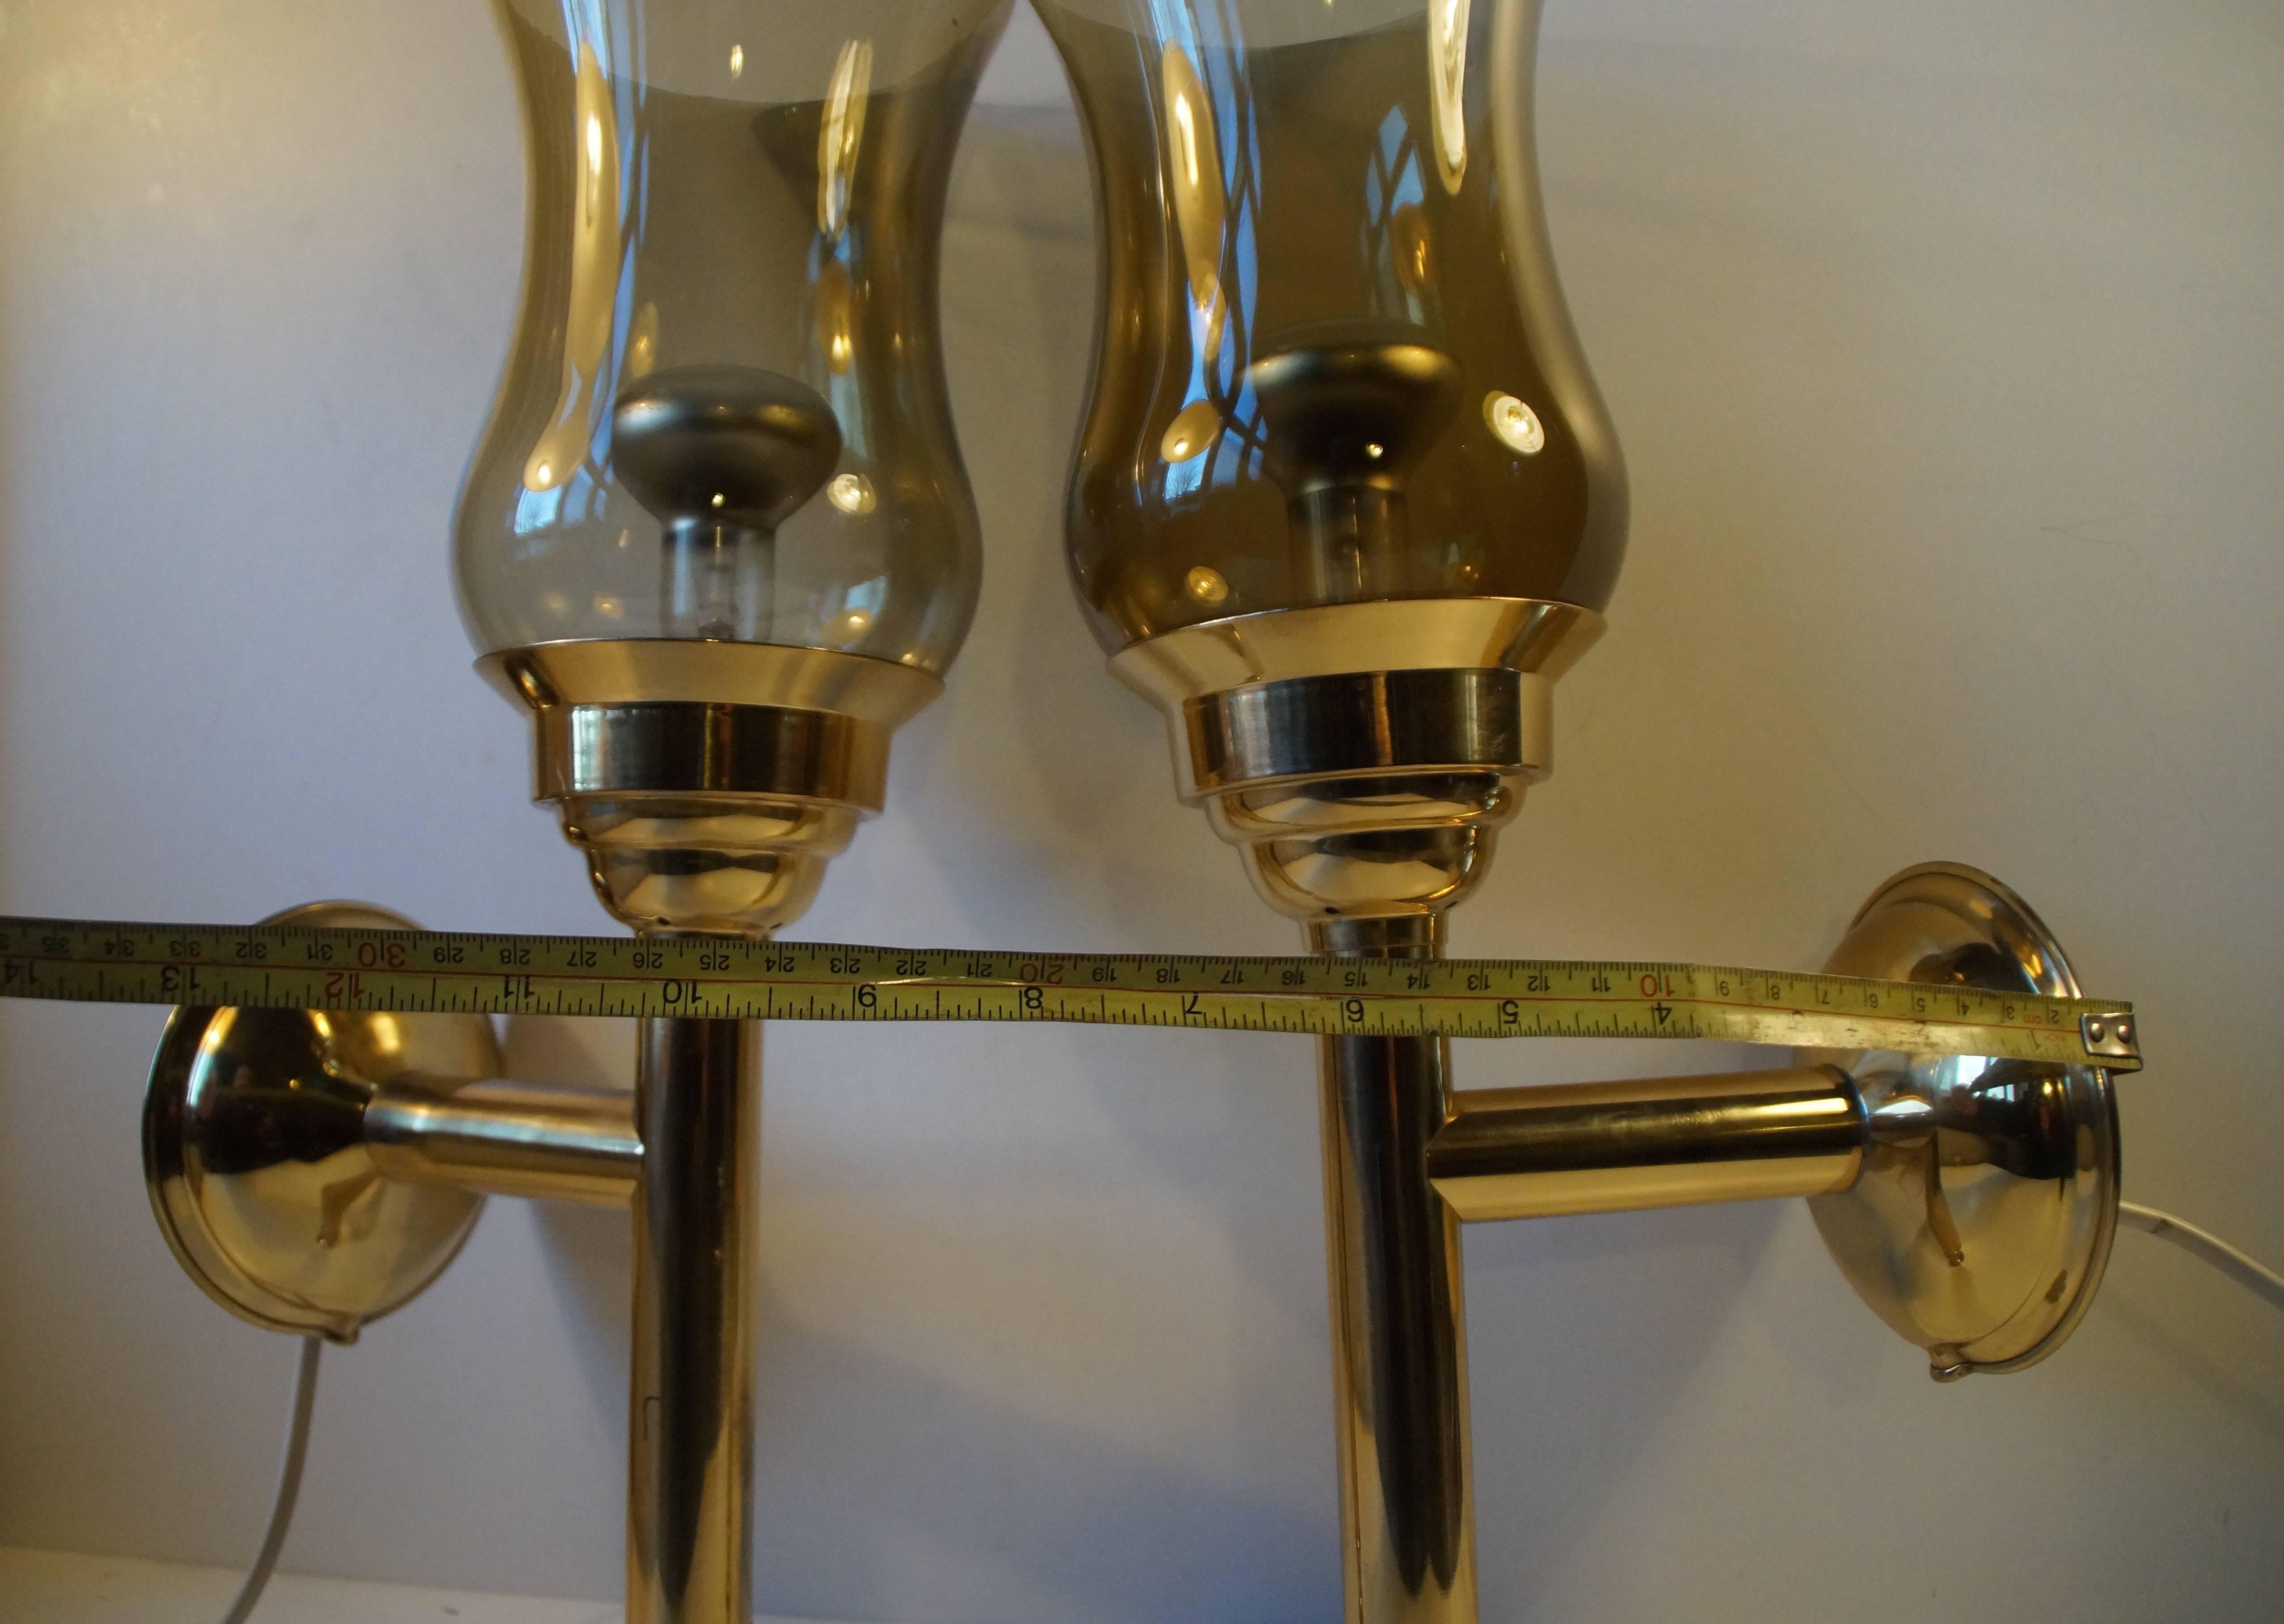 Scandinavian Modern Torch Wall Sconces in Brass and Smoke Glass In Good Condition For Sale In Esbjerg, DK